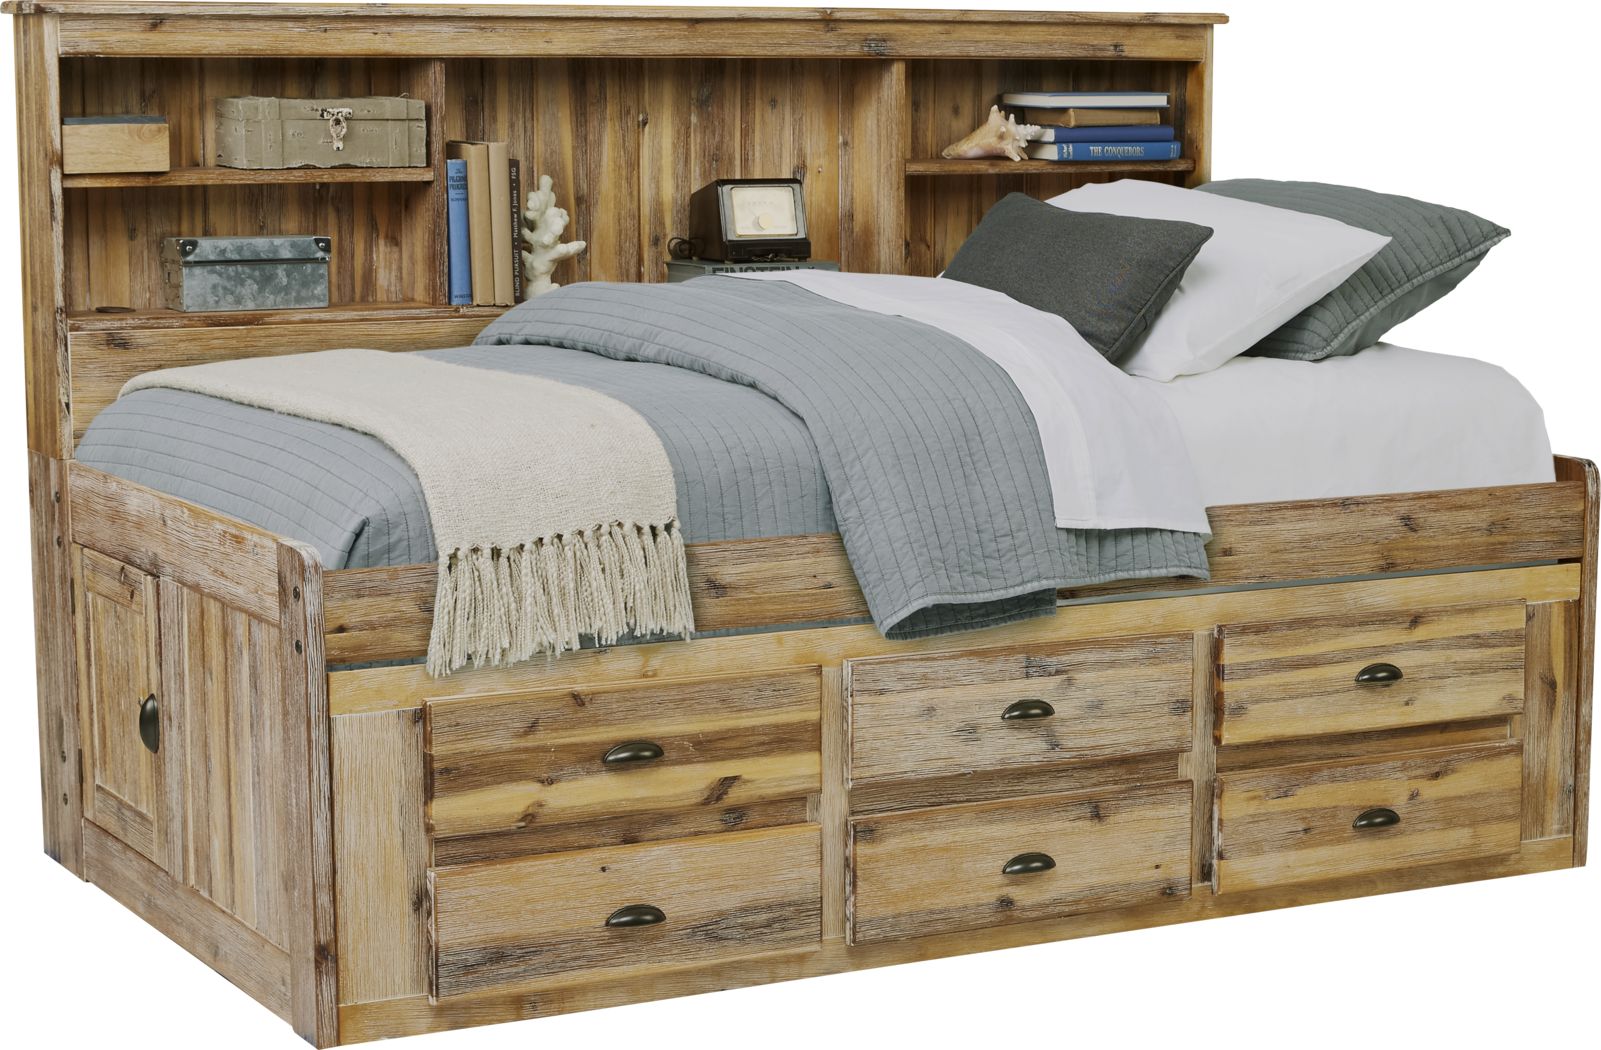 boys twin trundle bed